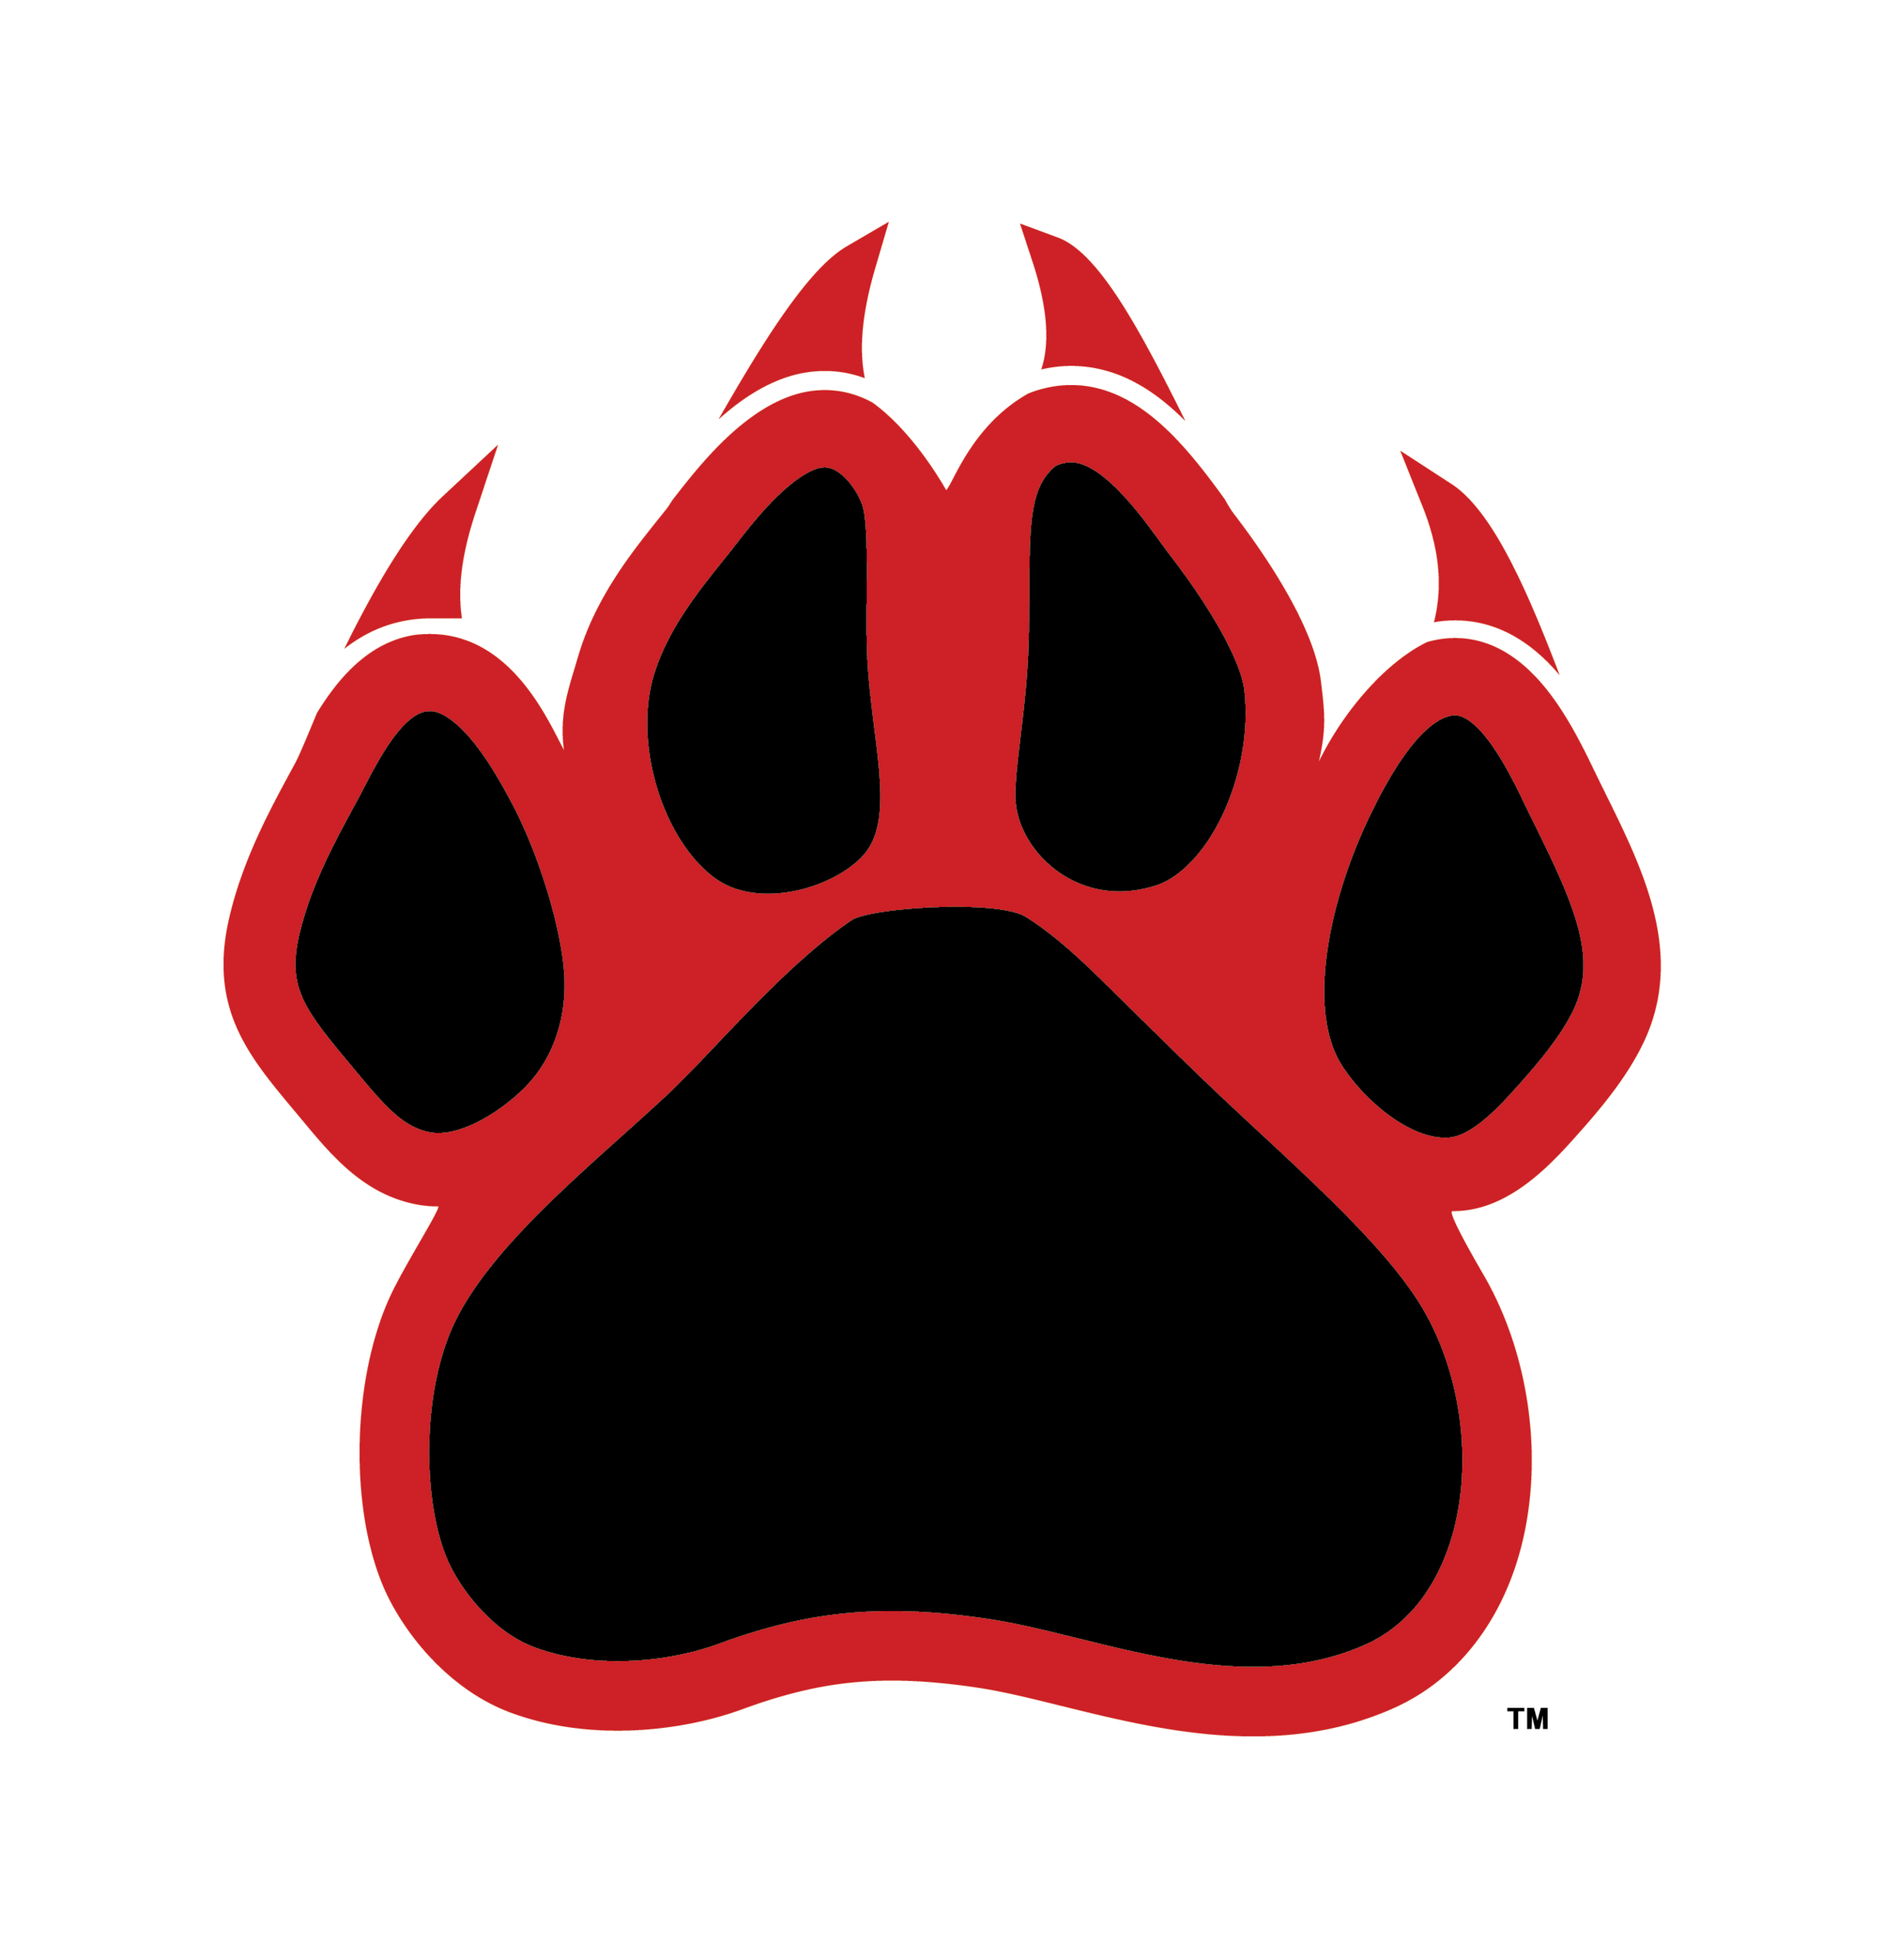 Red Wolf Paw Print Clipart - Free to use Clip Art Resource